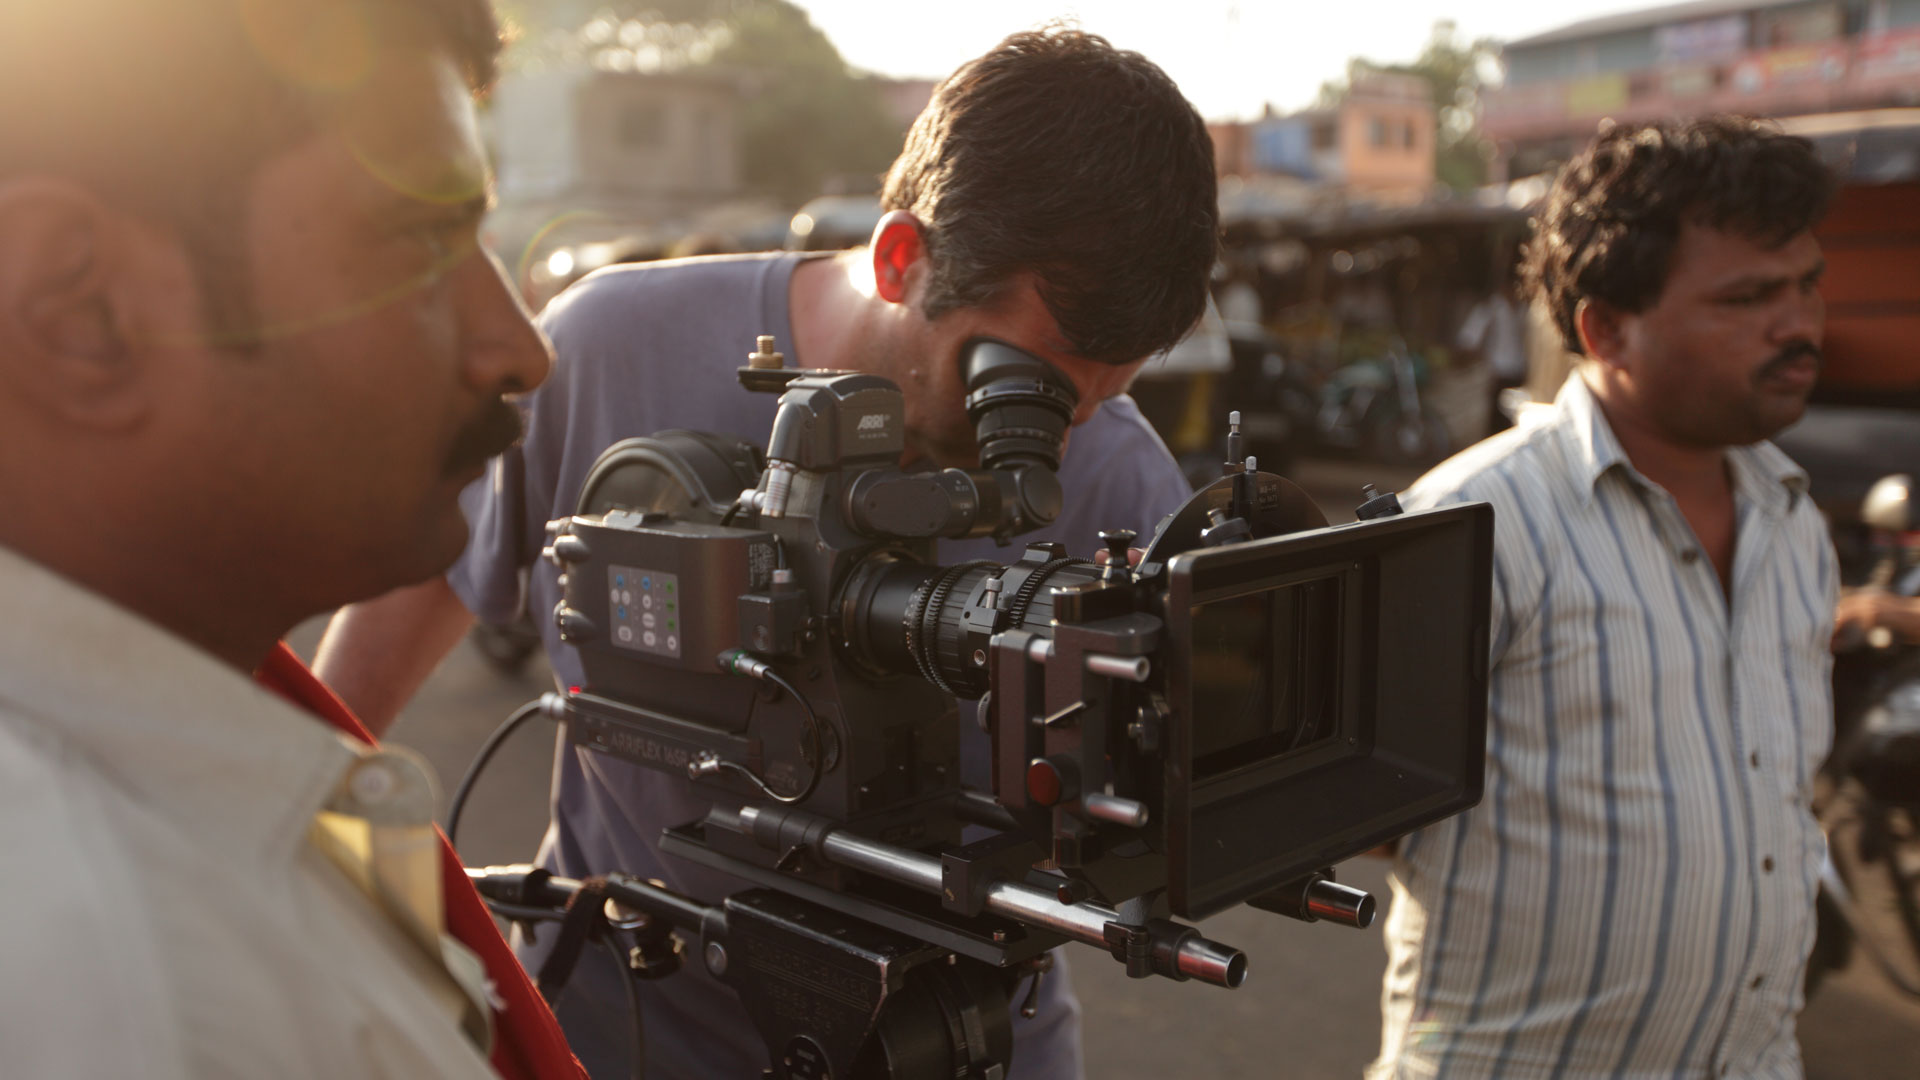 Mike Filming in 'Unconfined' in Maharashtra, India